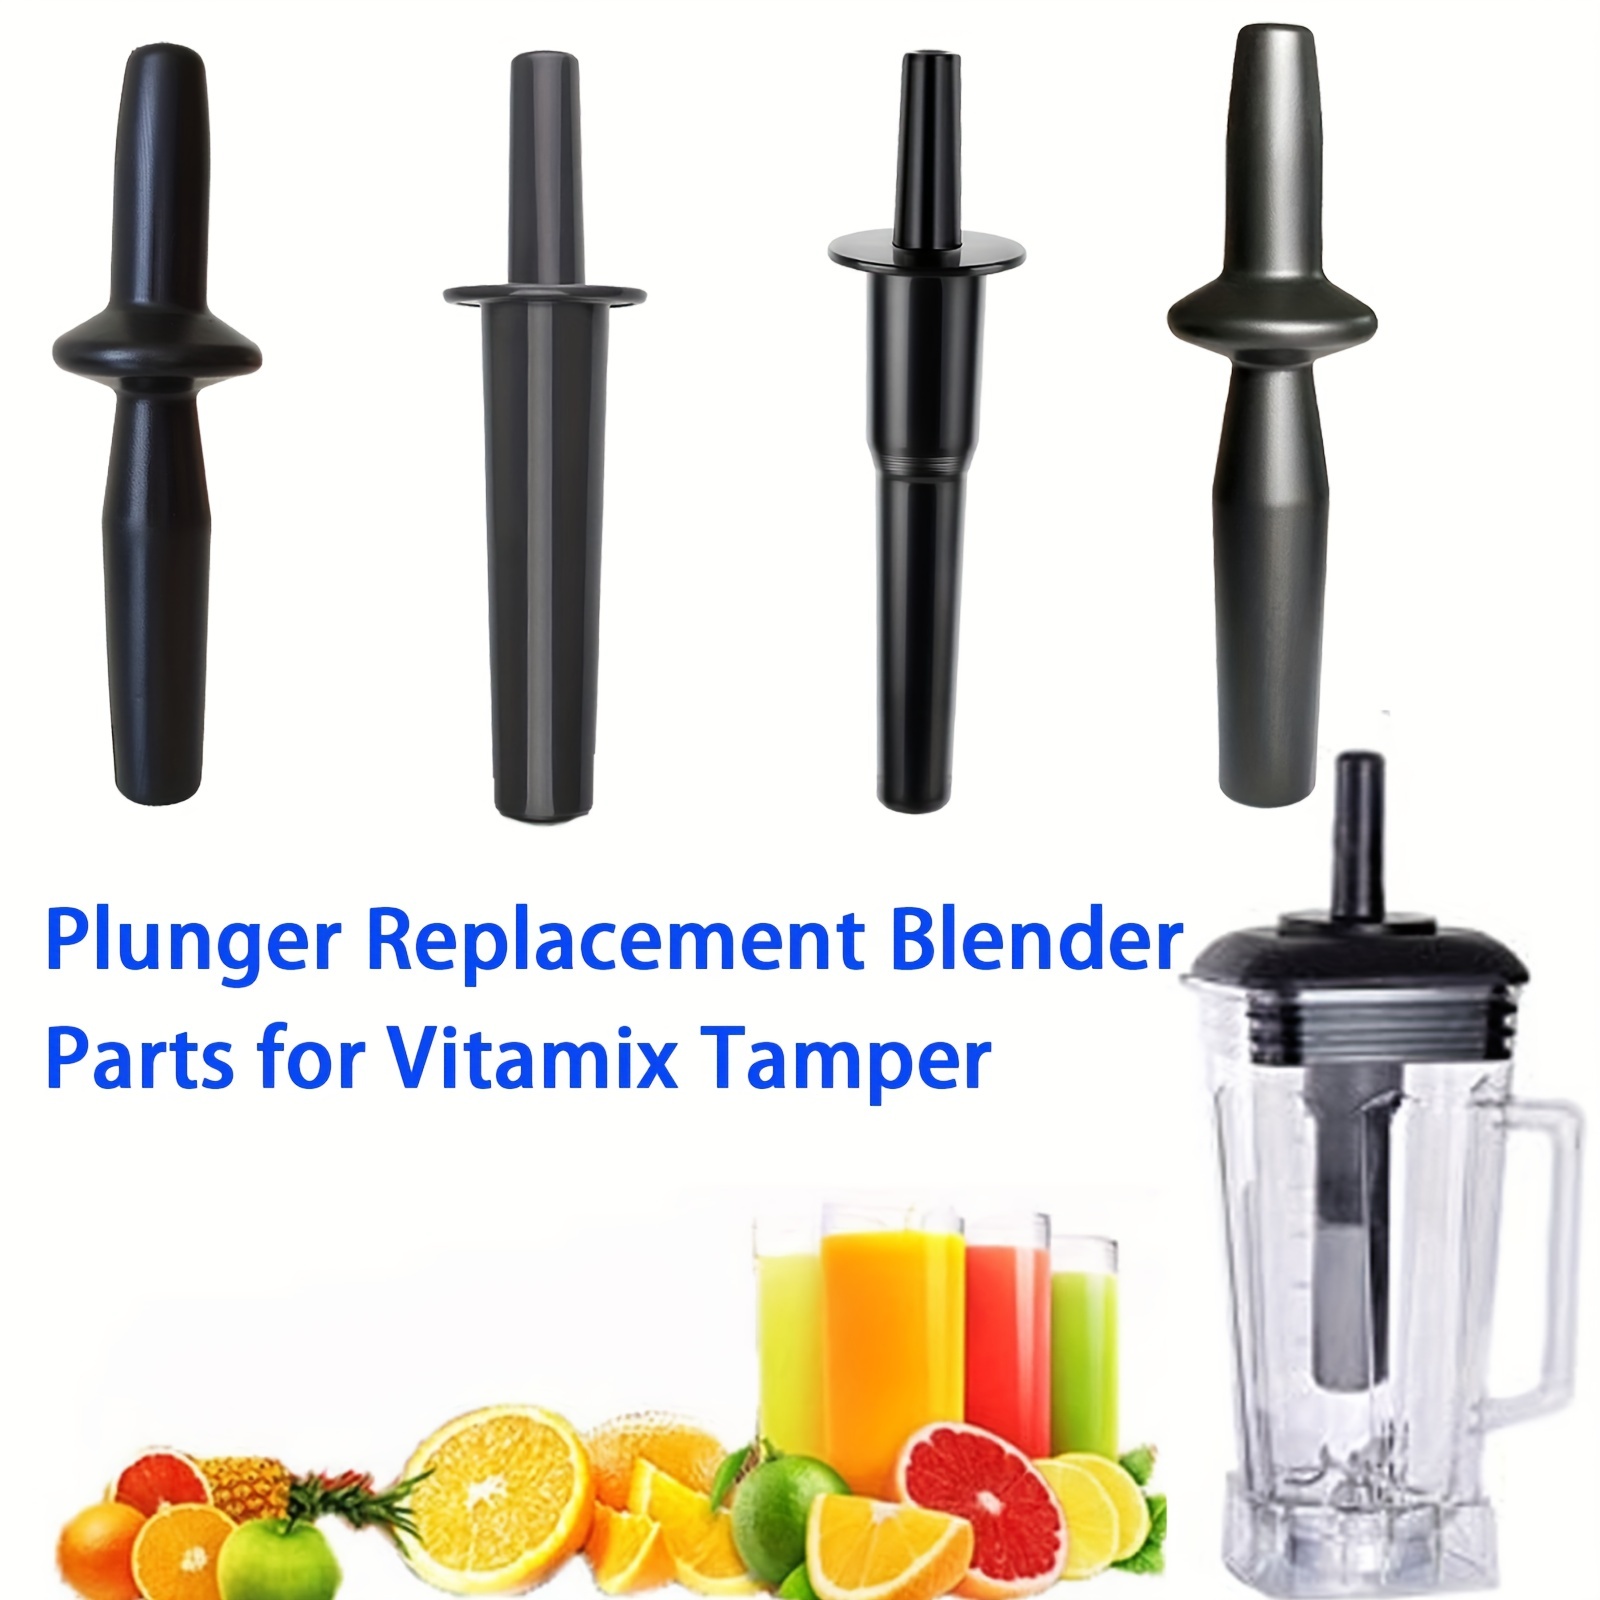  Blender Replacement Parts